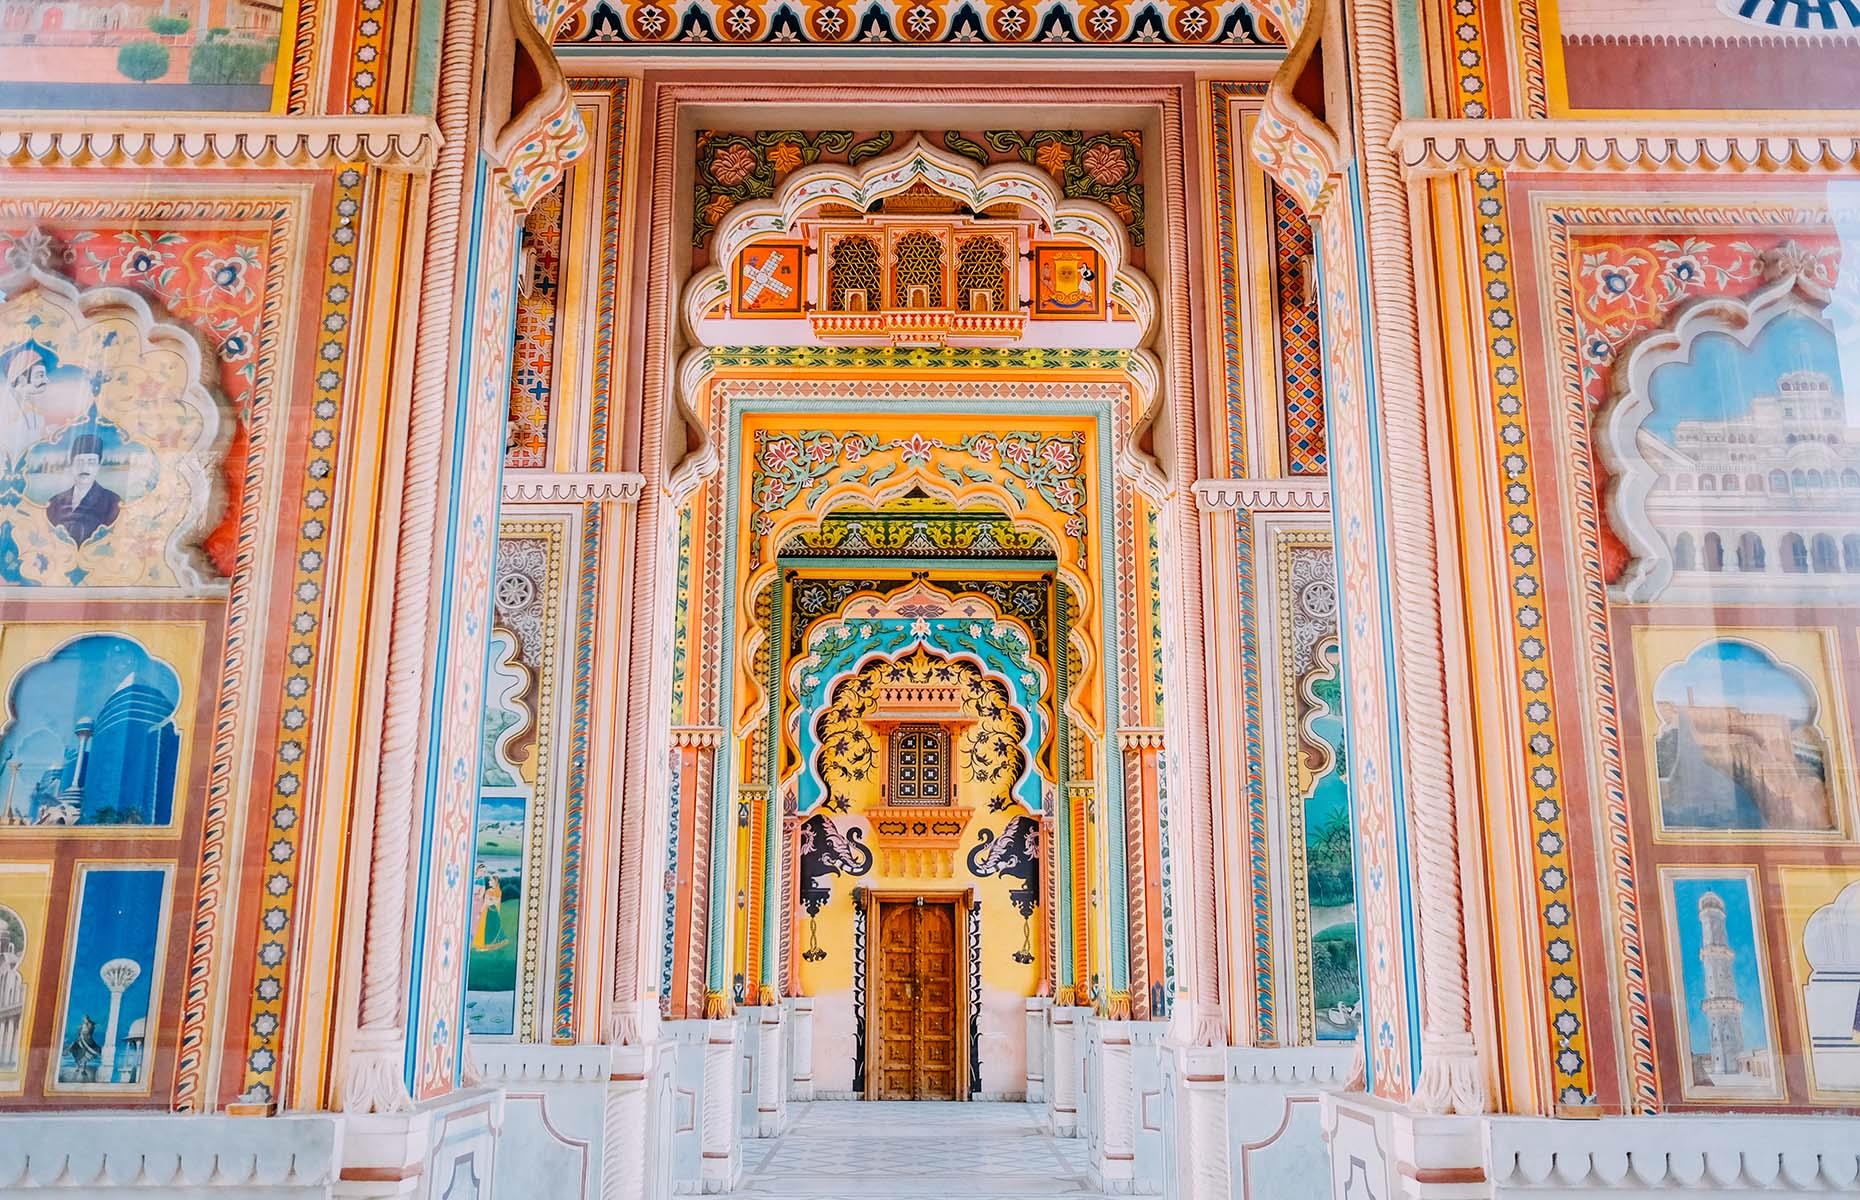 Talk about opulence. In 1853 ruler Maharaja Sawai Ram Singh II had the whole city of Jaipur painted pink for a visit from Edward, Prince of Wales and the future king of England. To this day, the Rajasthani capital retains its signature rose-tinted hue across historic buildings, homes and shops, and is one of the stops on the popular Golden Triangle circuit. Pictured here is Patrika Gate, one of the seven gates along Jaipur's city walls.